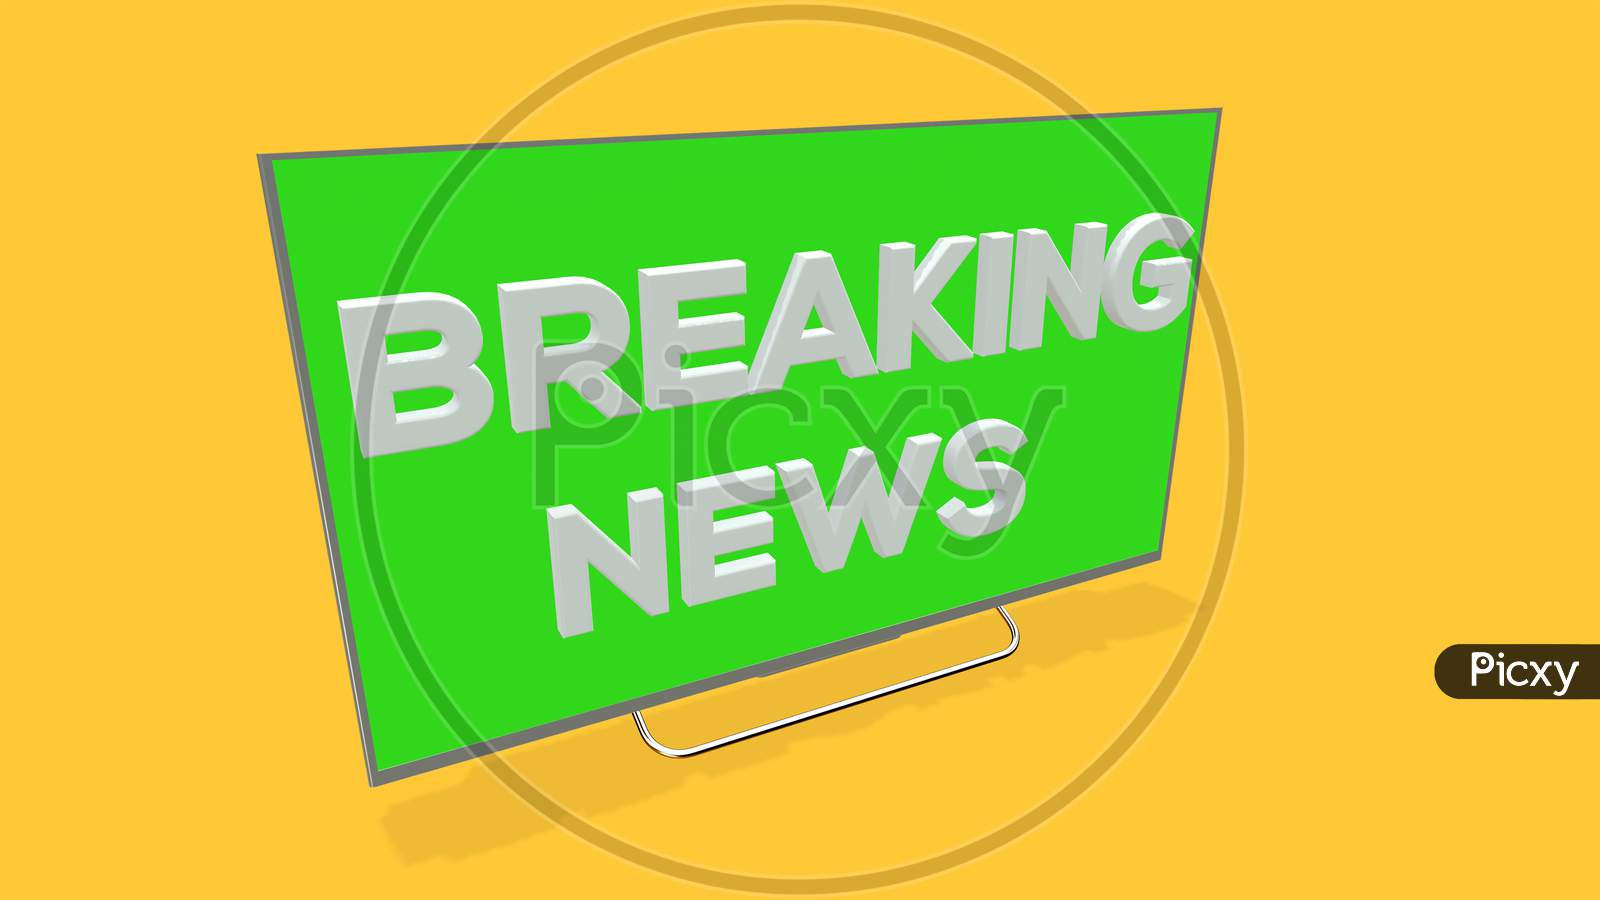 3D Illustration Of A Breaking News Tv Screen On Yellow Background